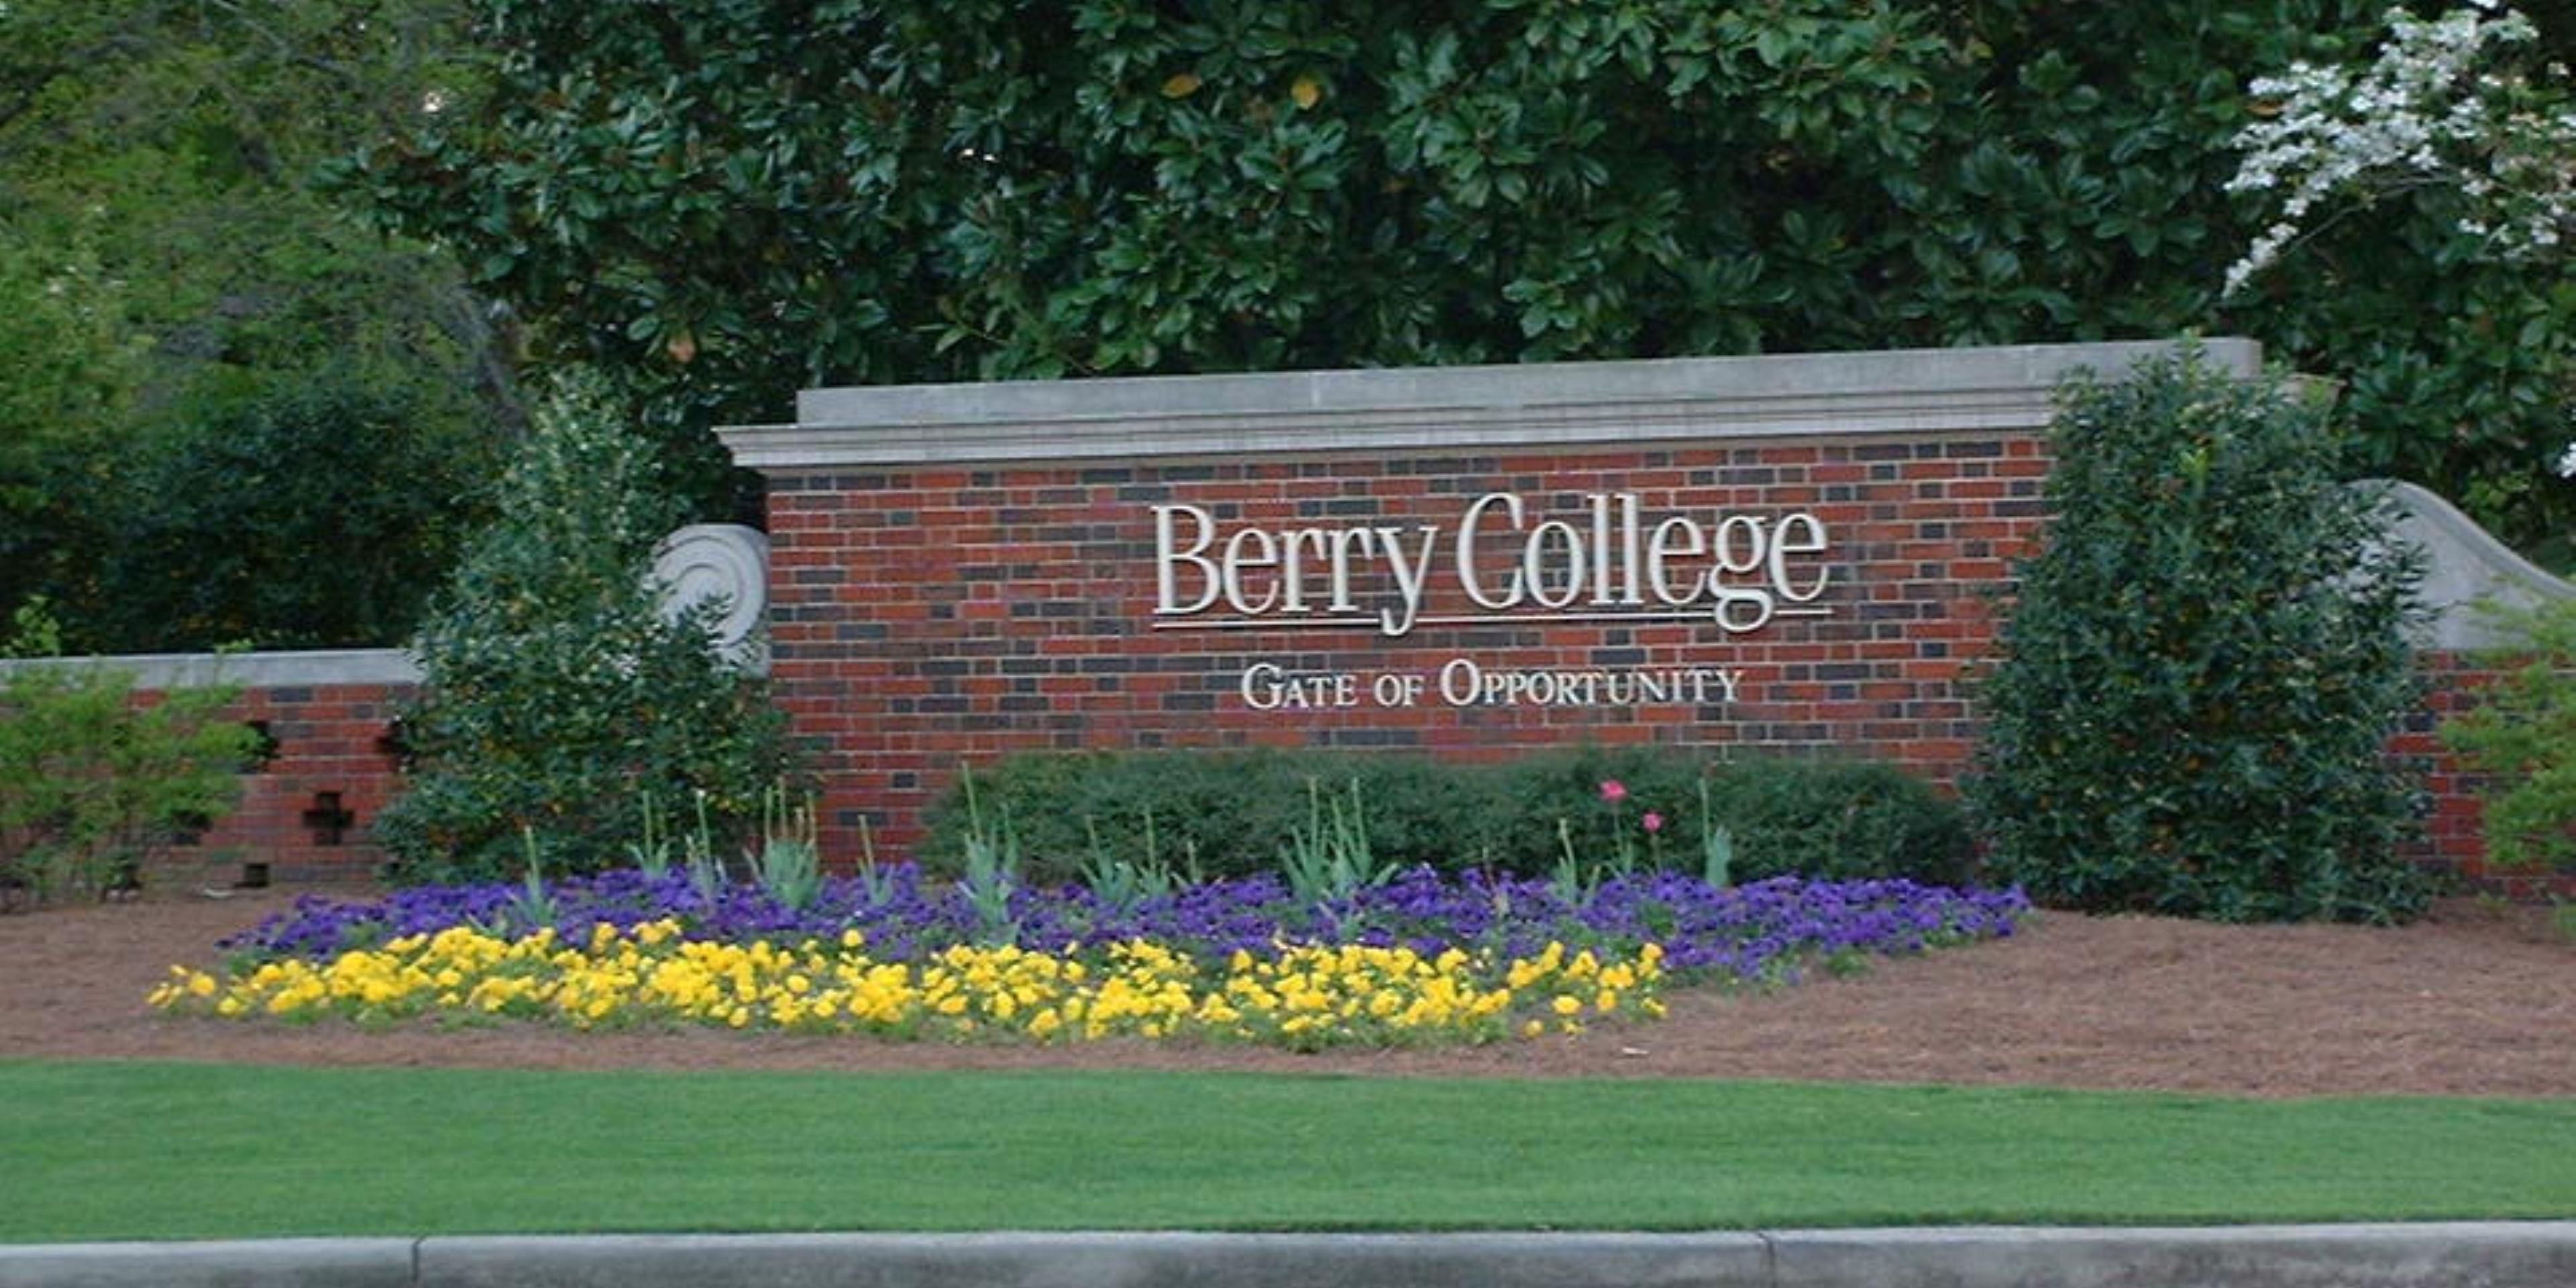 Our hotel is only 6 miles from the Berry campus. Berry College is considered the largest campus in the World consists of more than 27,000 acres of land and also has a large population of deer. Berry College football team is the Vikings. Berry sports include men’s and women's soccer, golf, volleyball, lacrosse, baseball, and more.